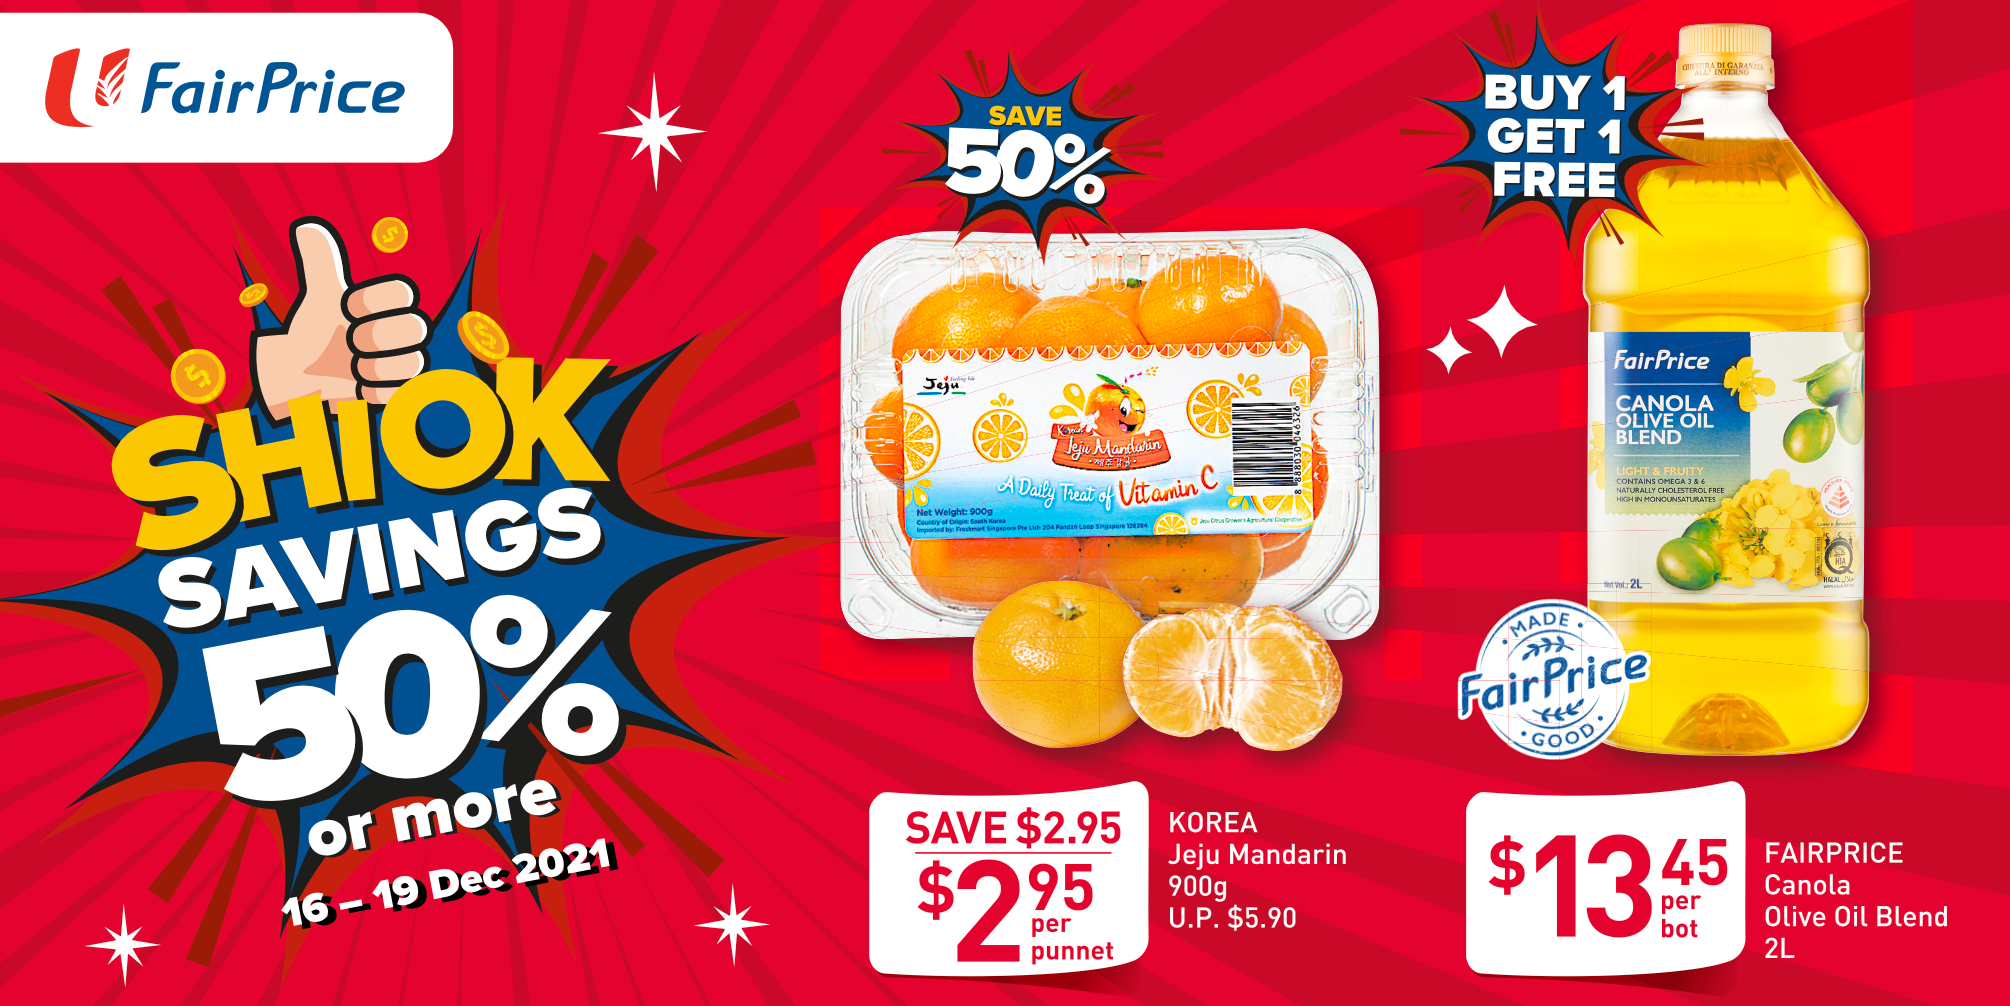 Enjoy SHIOK Savings of 50% at FairPrice, including Jeju Mandarins and 1 for 1 Canola Olive Oil